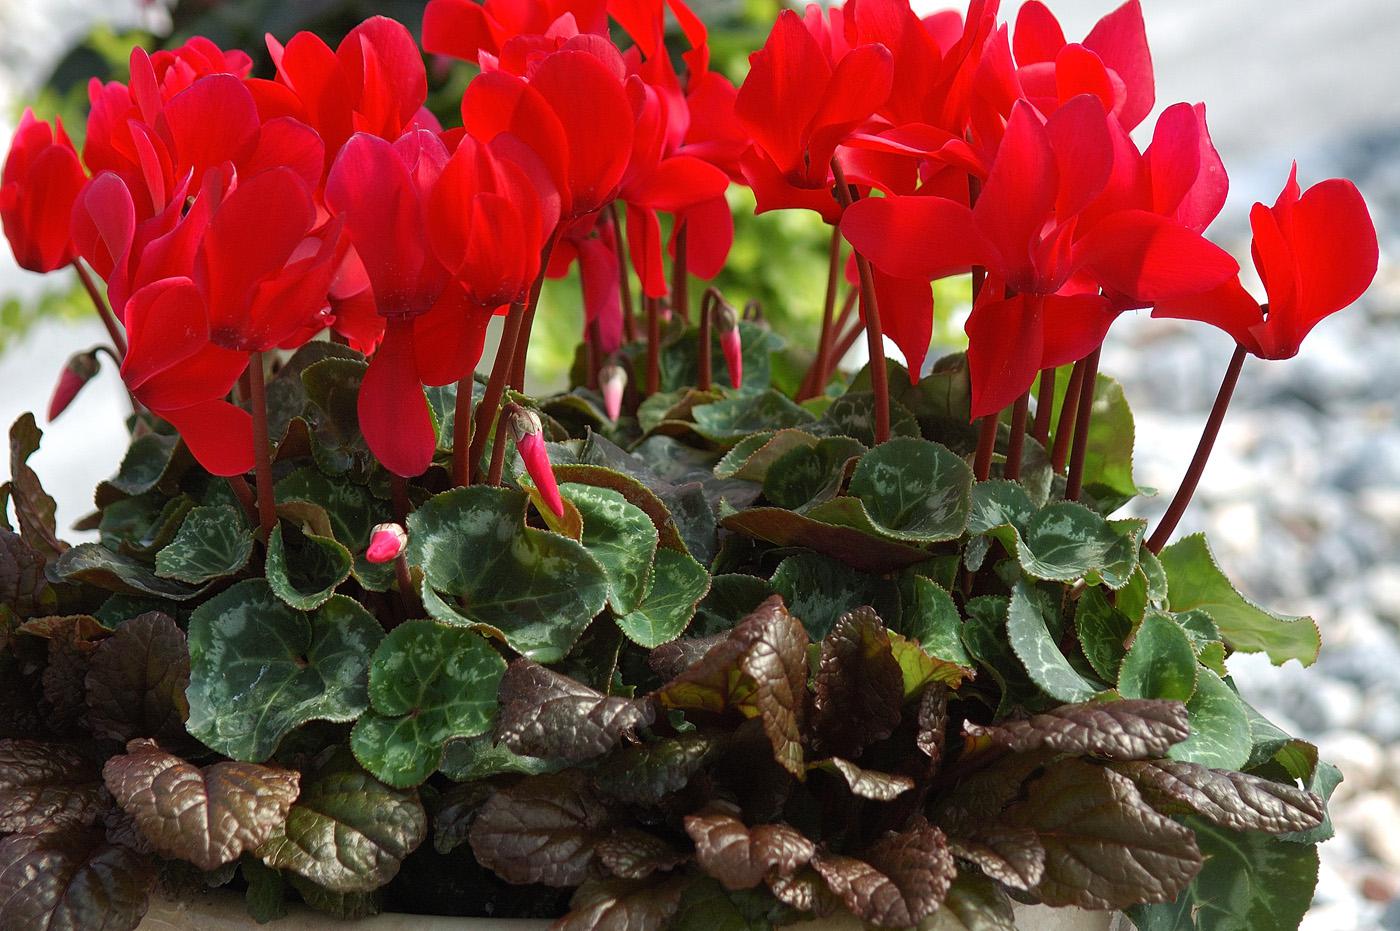 Ajuga can be a good companion for cyclamen. Avoid highly variegated forms that could clash. Instead, look for the chocolate-colored leaf selections that provide just the right amount of pizzazz.